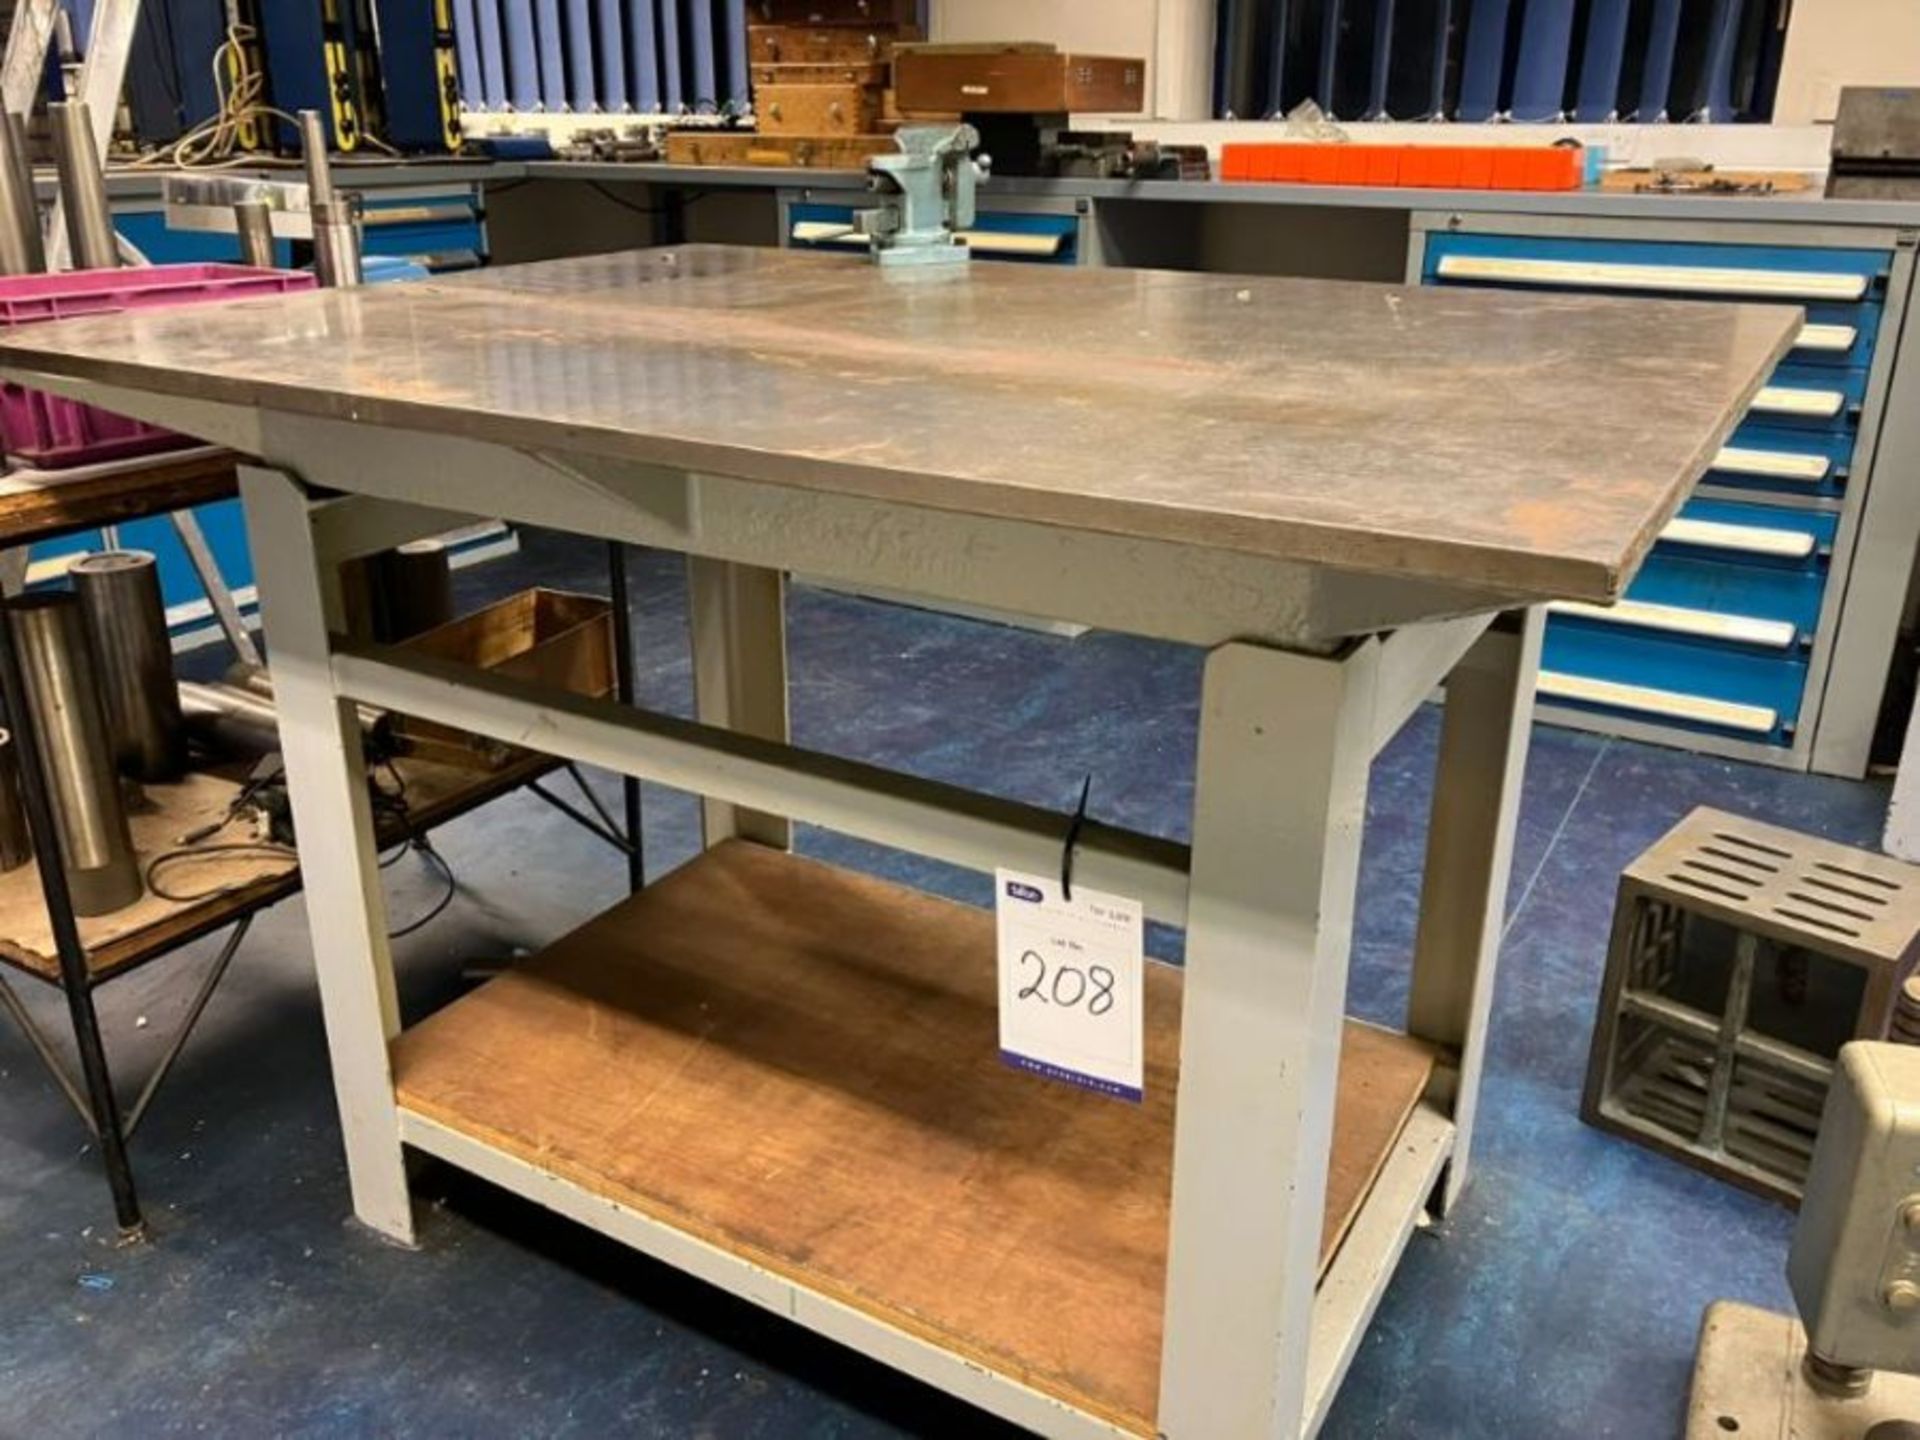 A 48" x 36" steel layout table